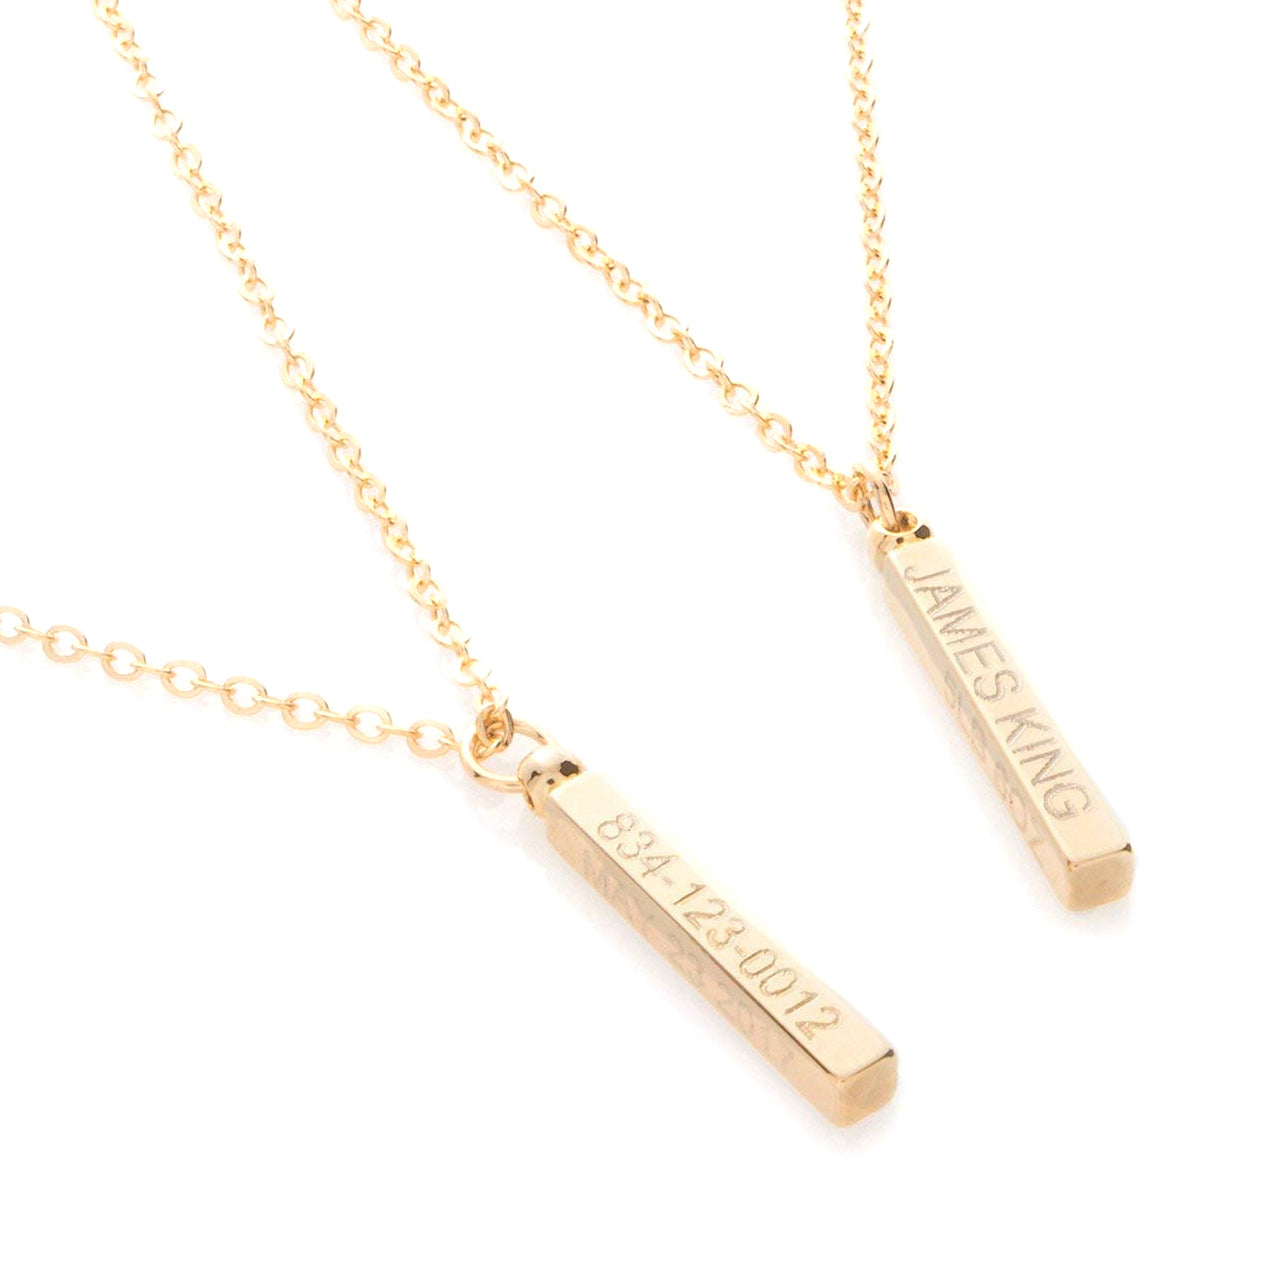 Buy Custom Delicate Vertical Bar Necklace - Personalized 16K Plated Jewelry at Petite Boutique"